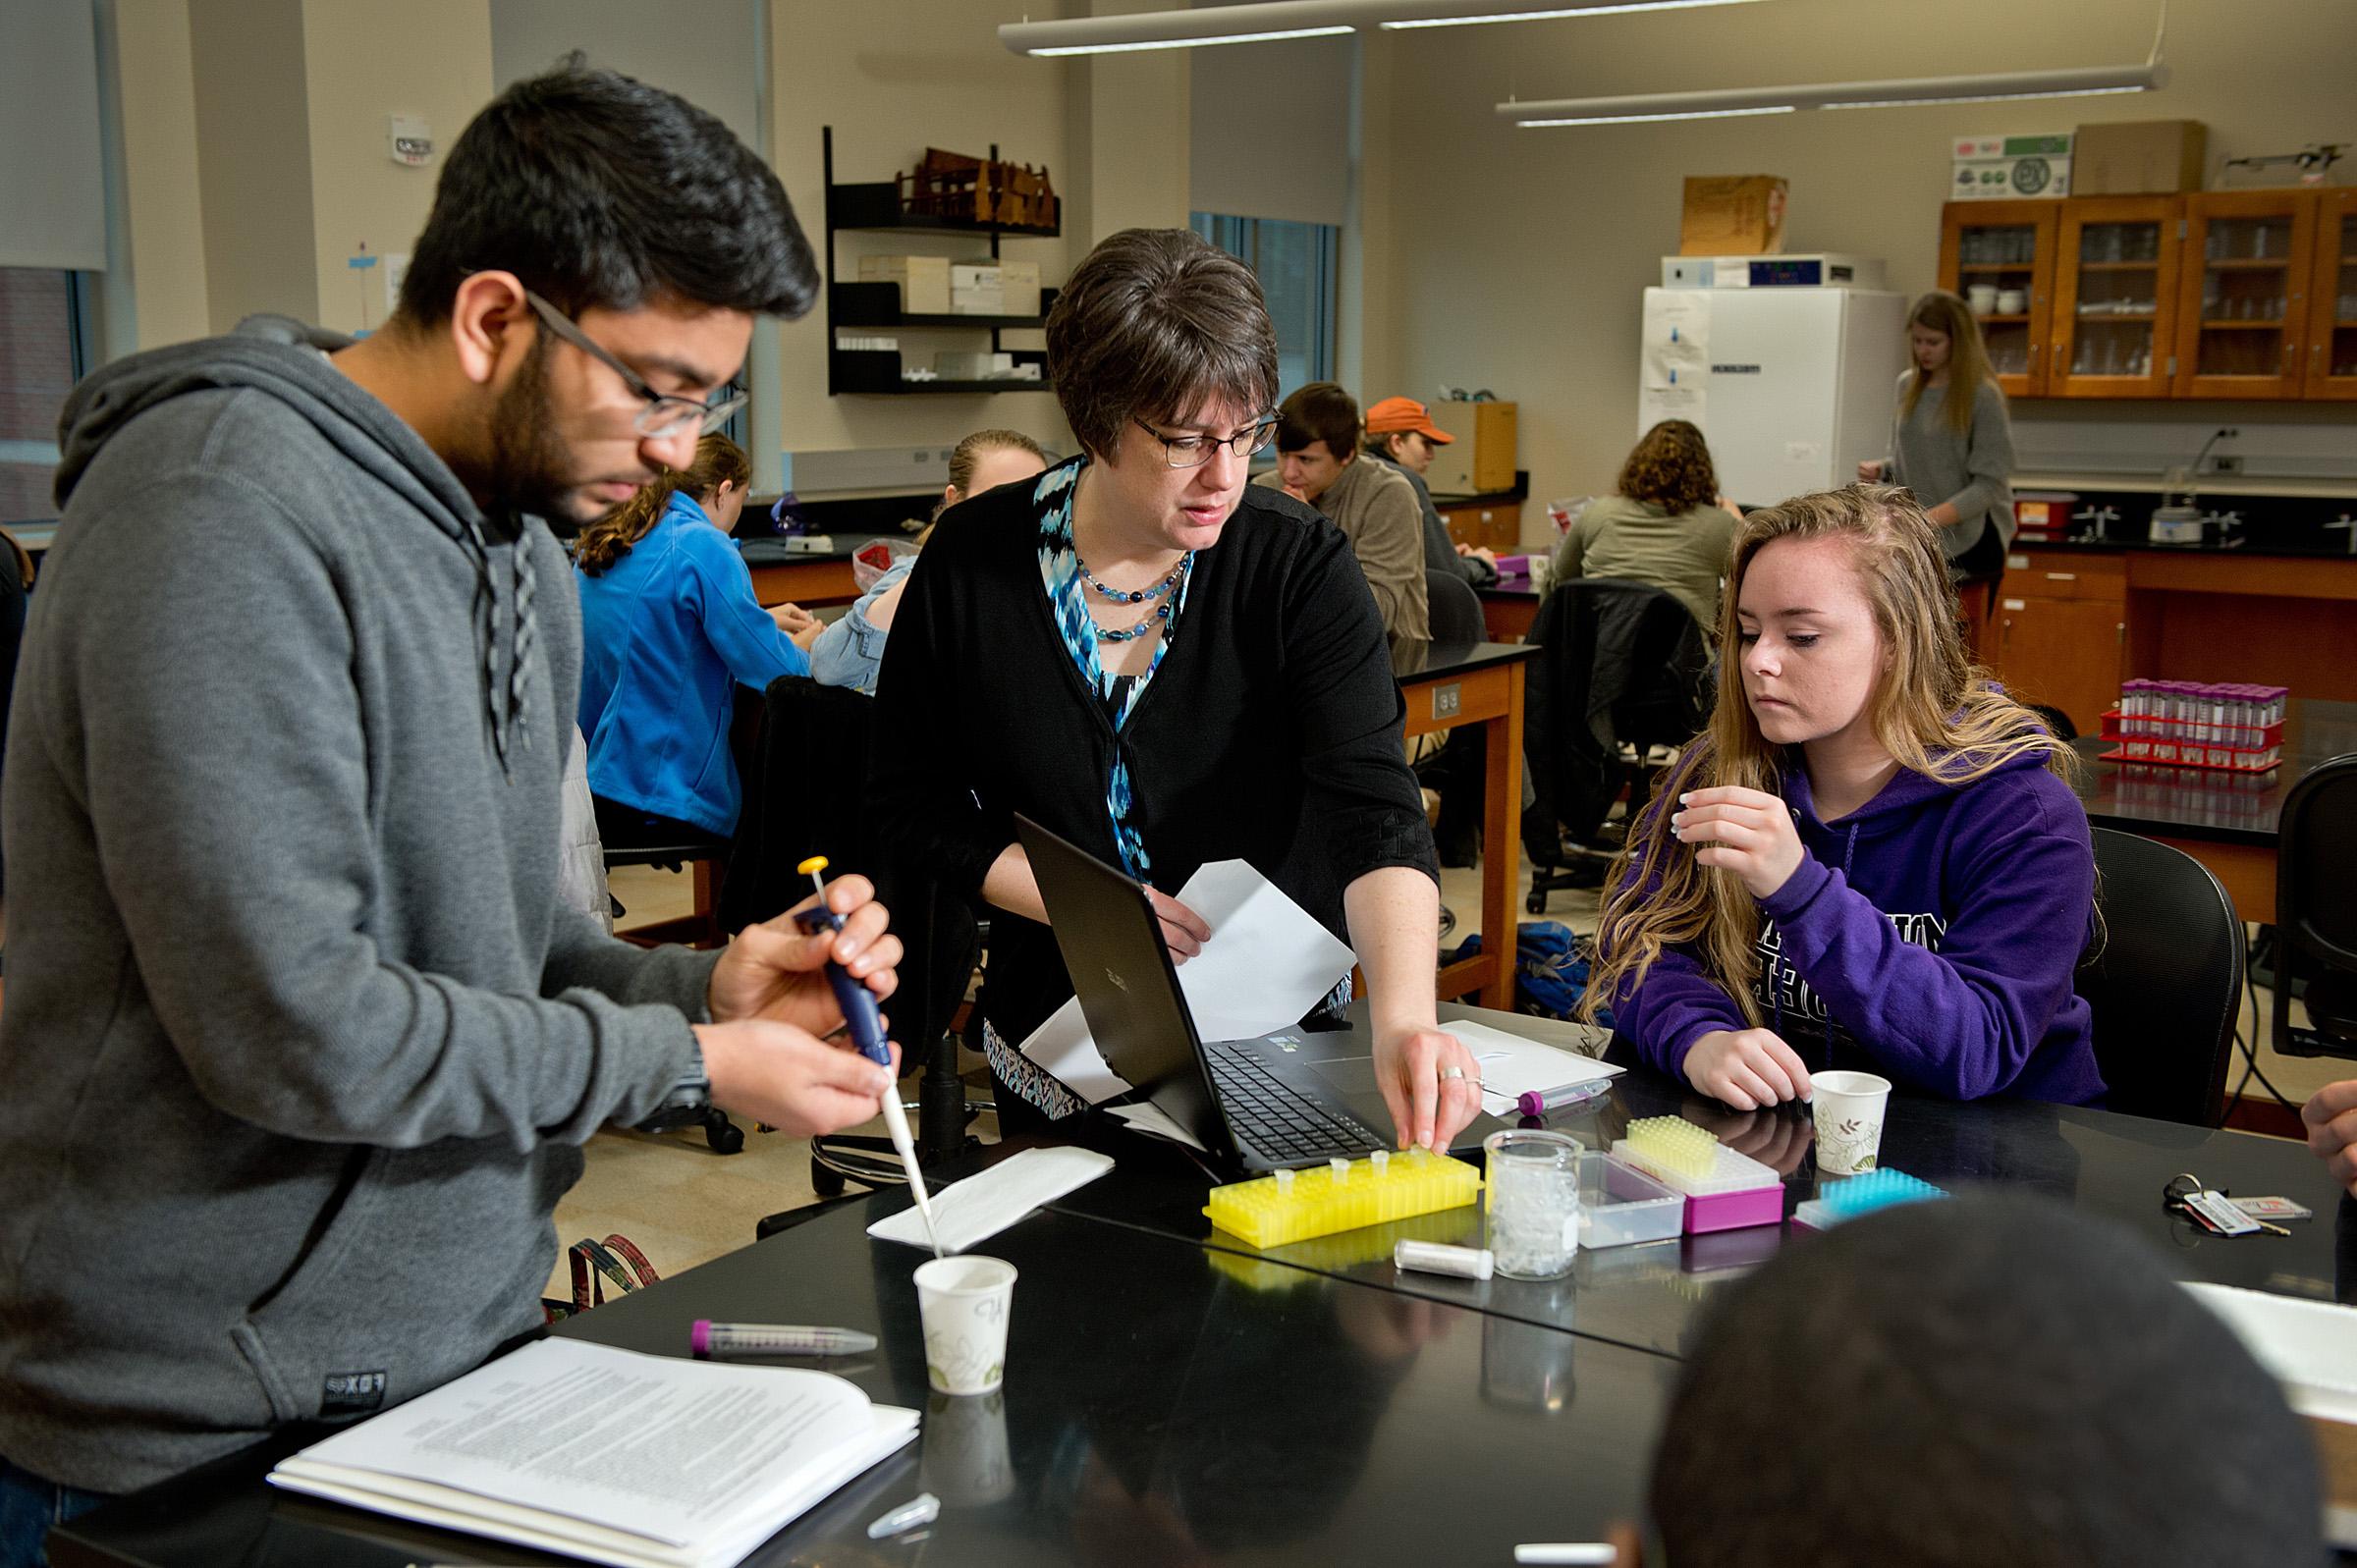 A faculty member assists two students with a lab assignment